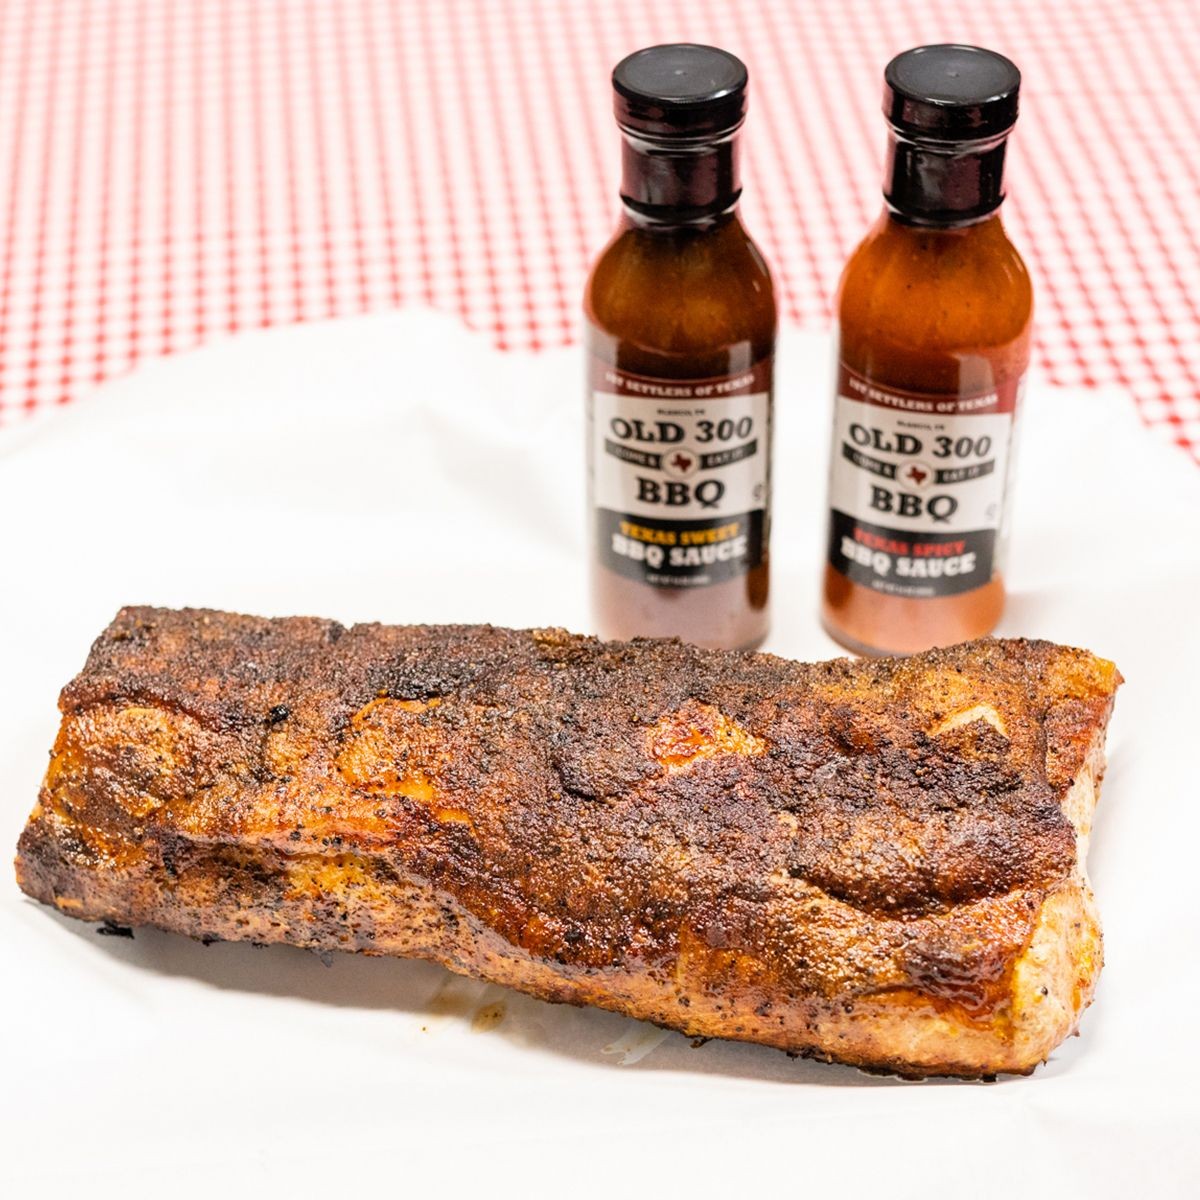 Smoked pork loin and sweet and spicy sauces from Old 300 BBQ